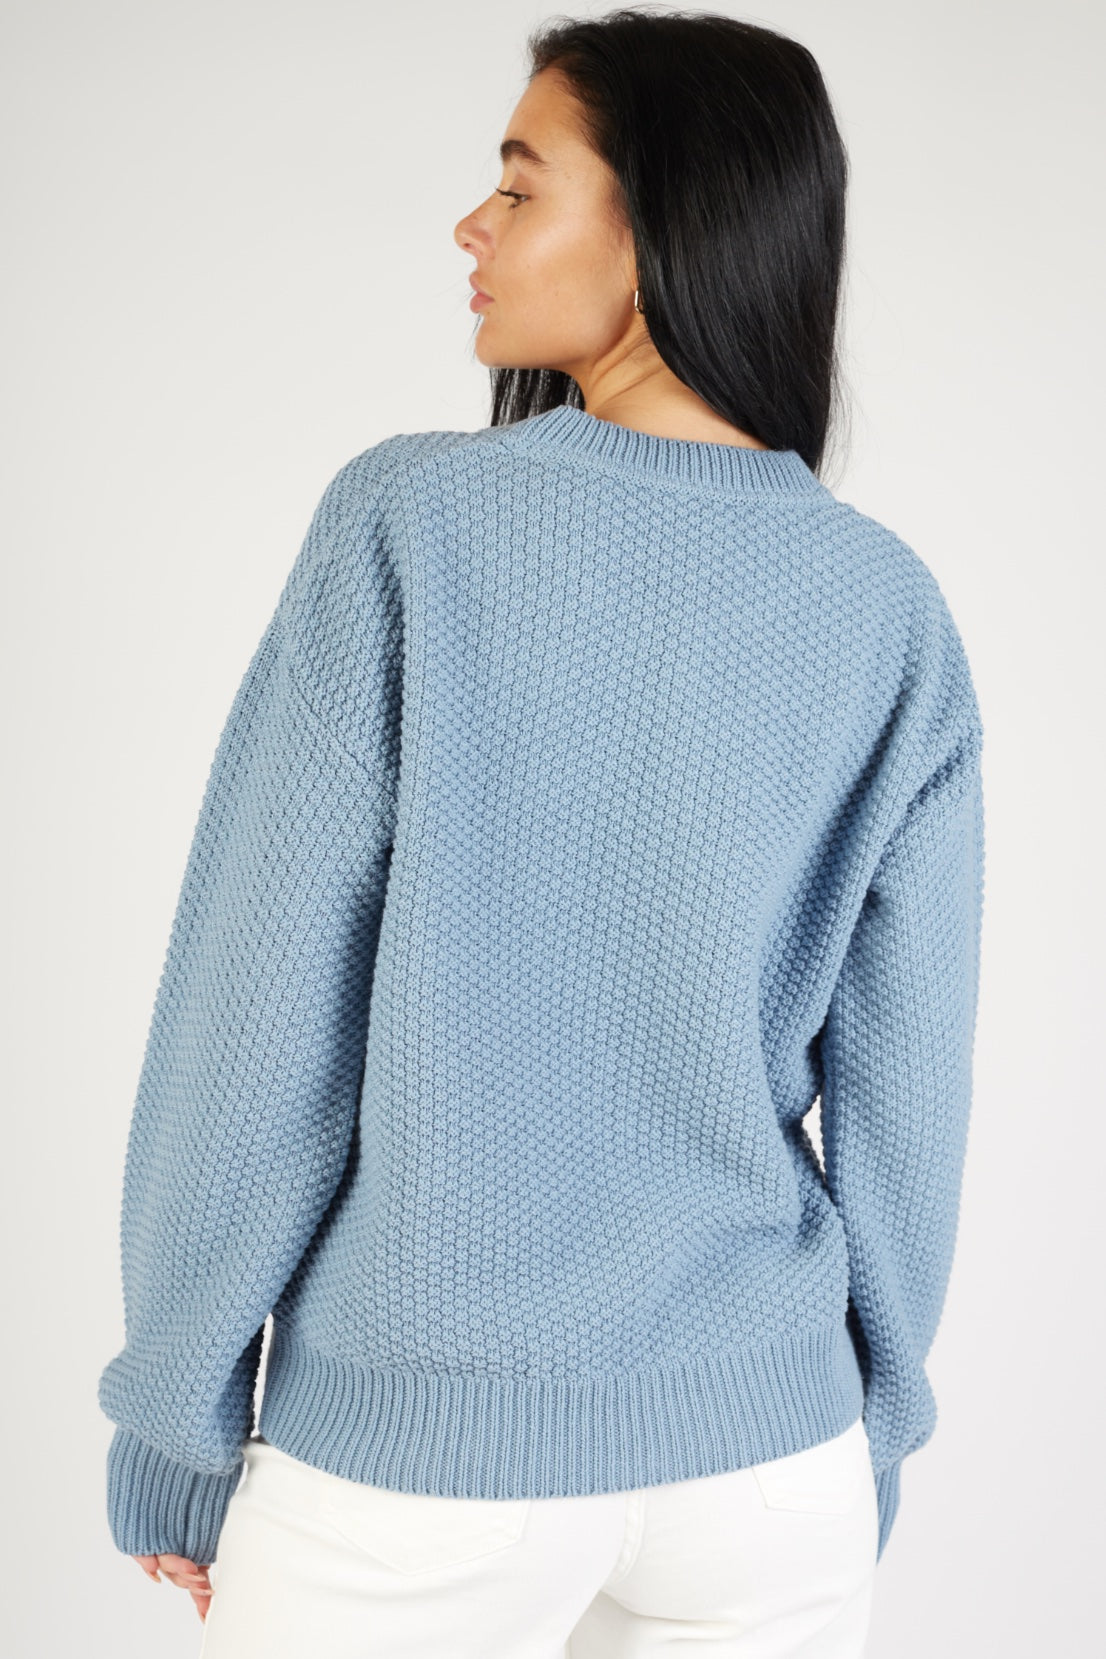 O&F Heart Embroidered Jumper - Blue